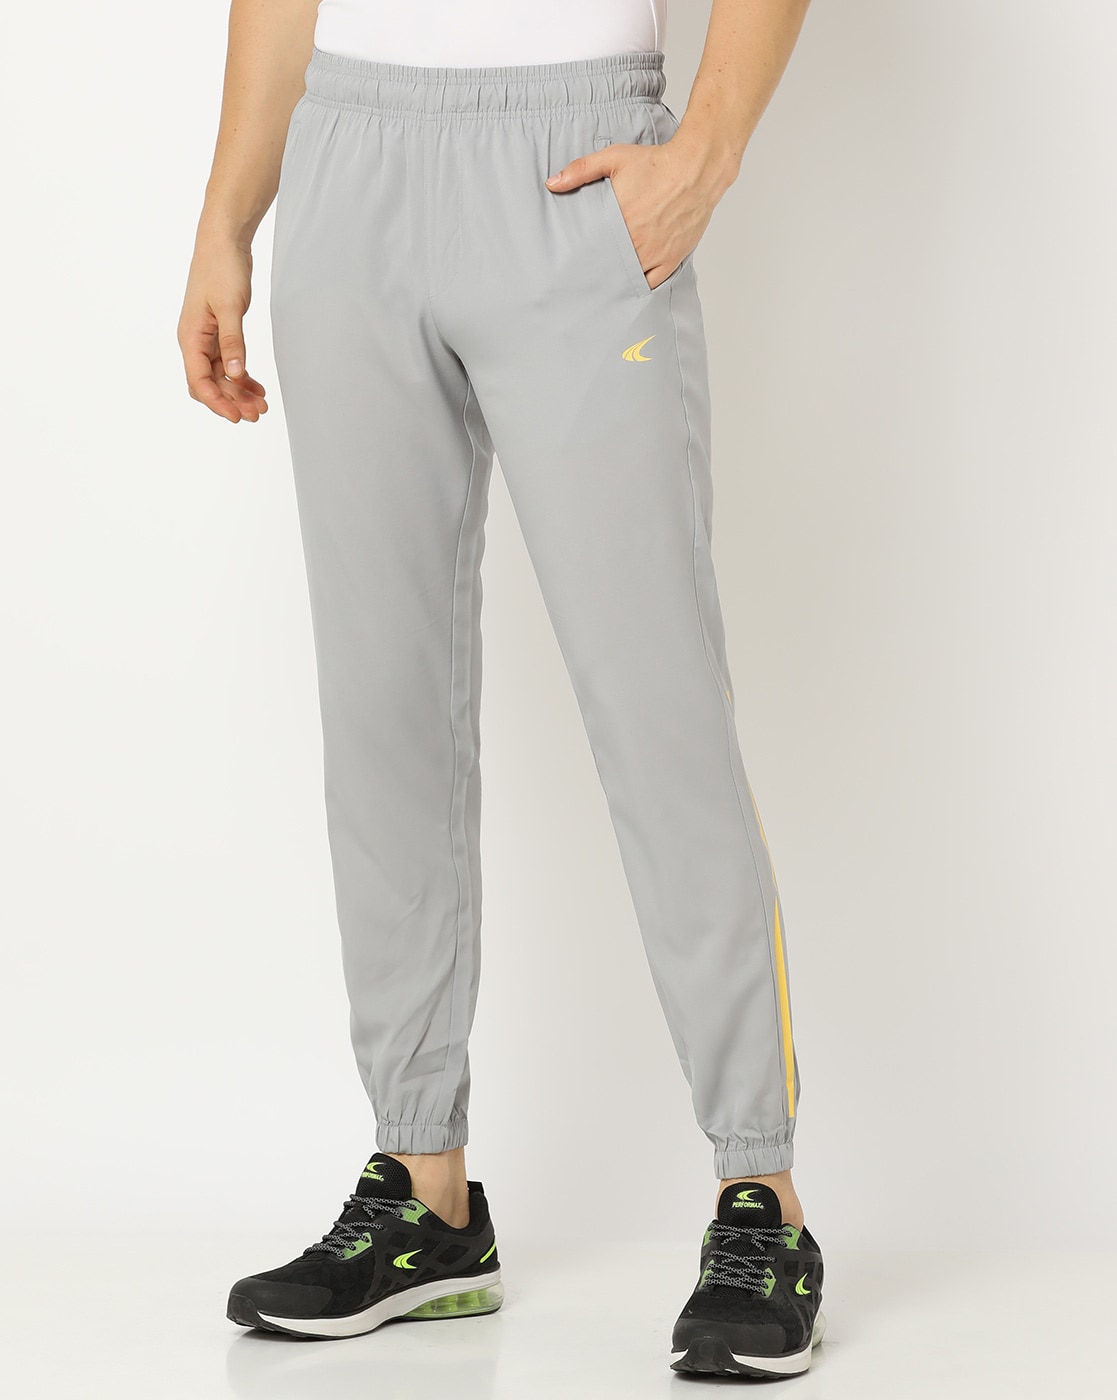 Buy Women's High-Low Ankle Golf Pant | PXG Canada